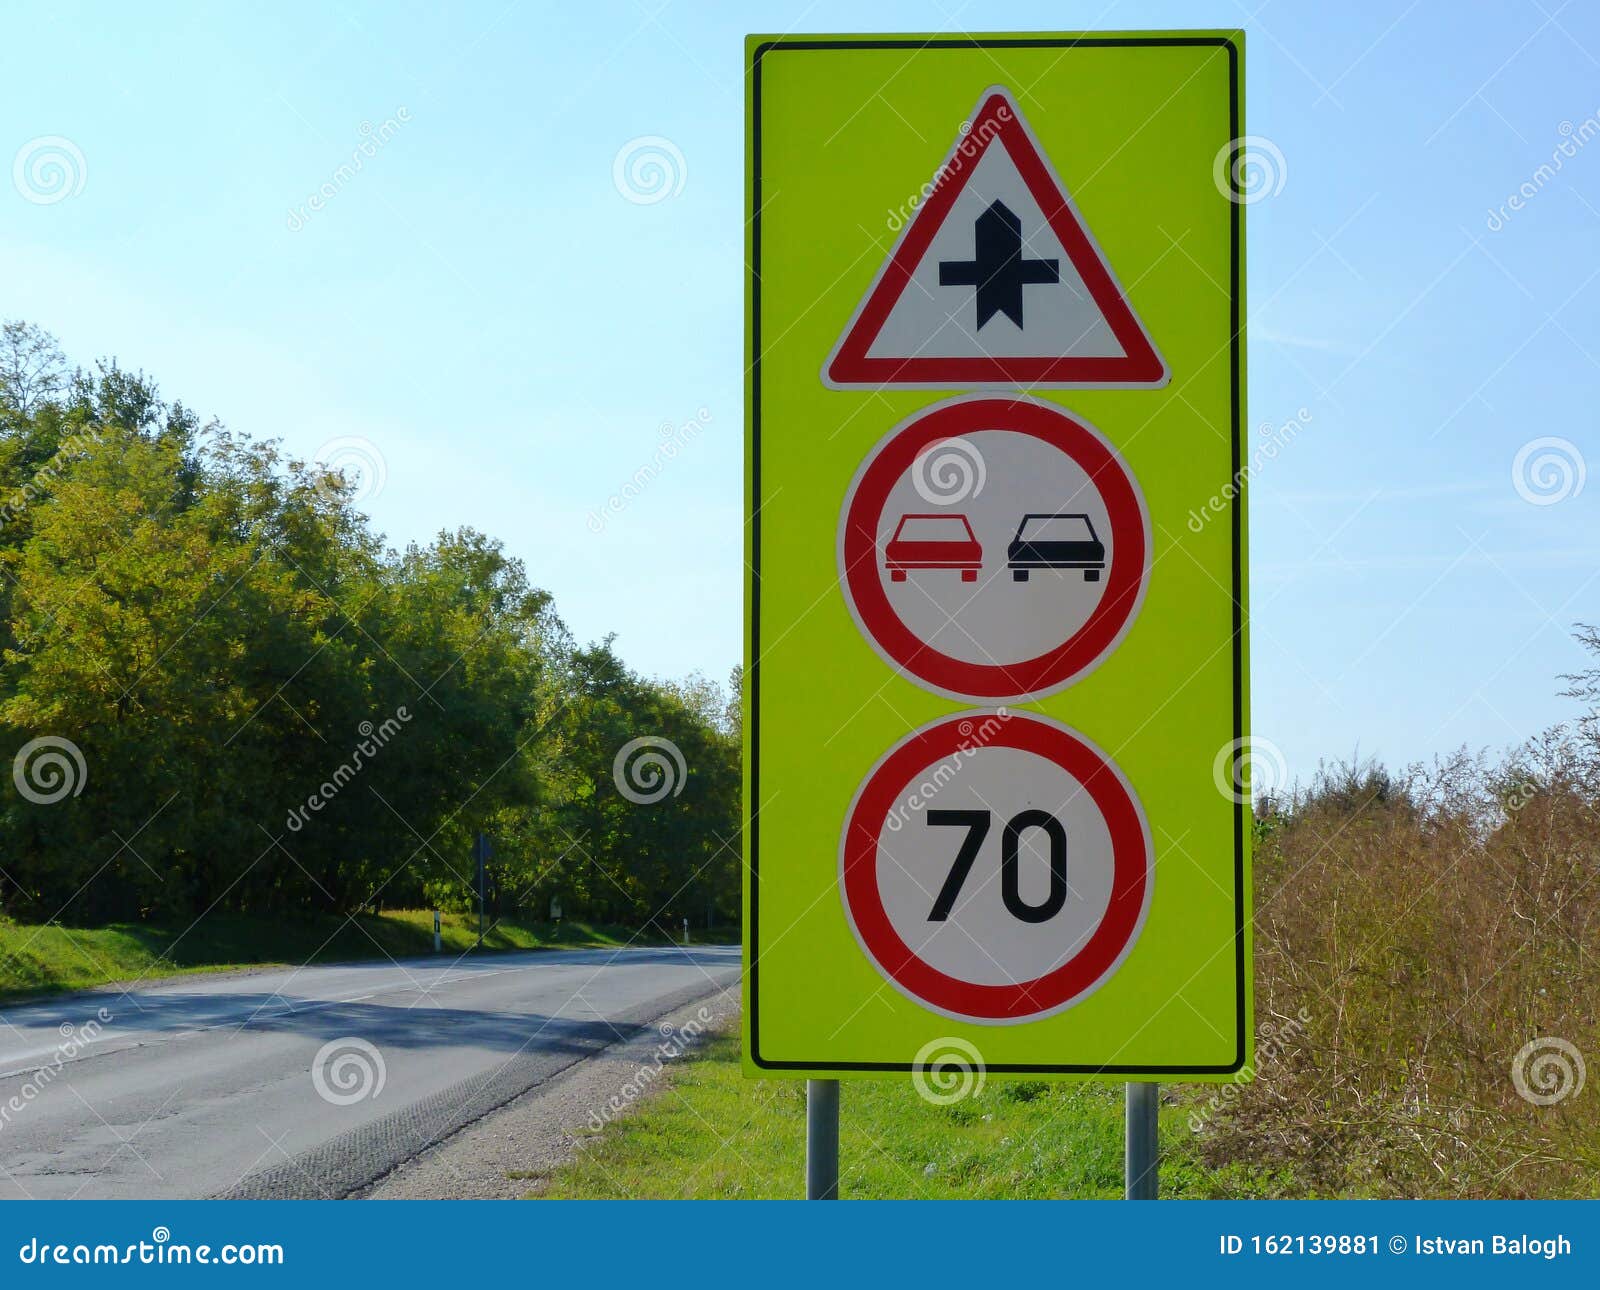 Traffic Signs In Bright Yellow And Red Speed Limit Indicator Stock Image Image Of Restrictions Highway